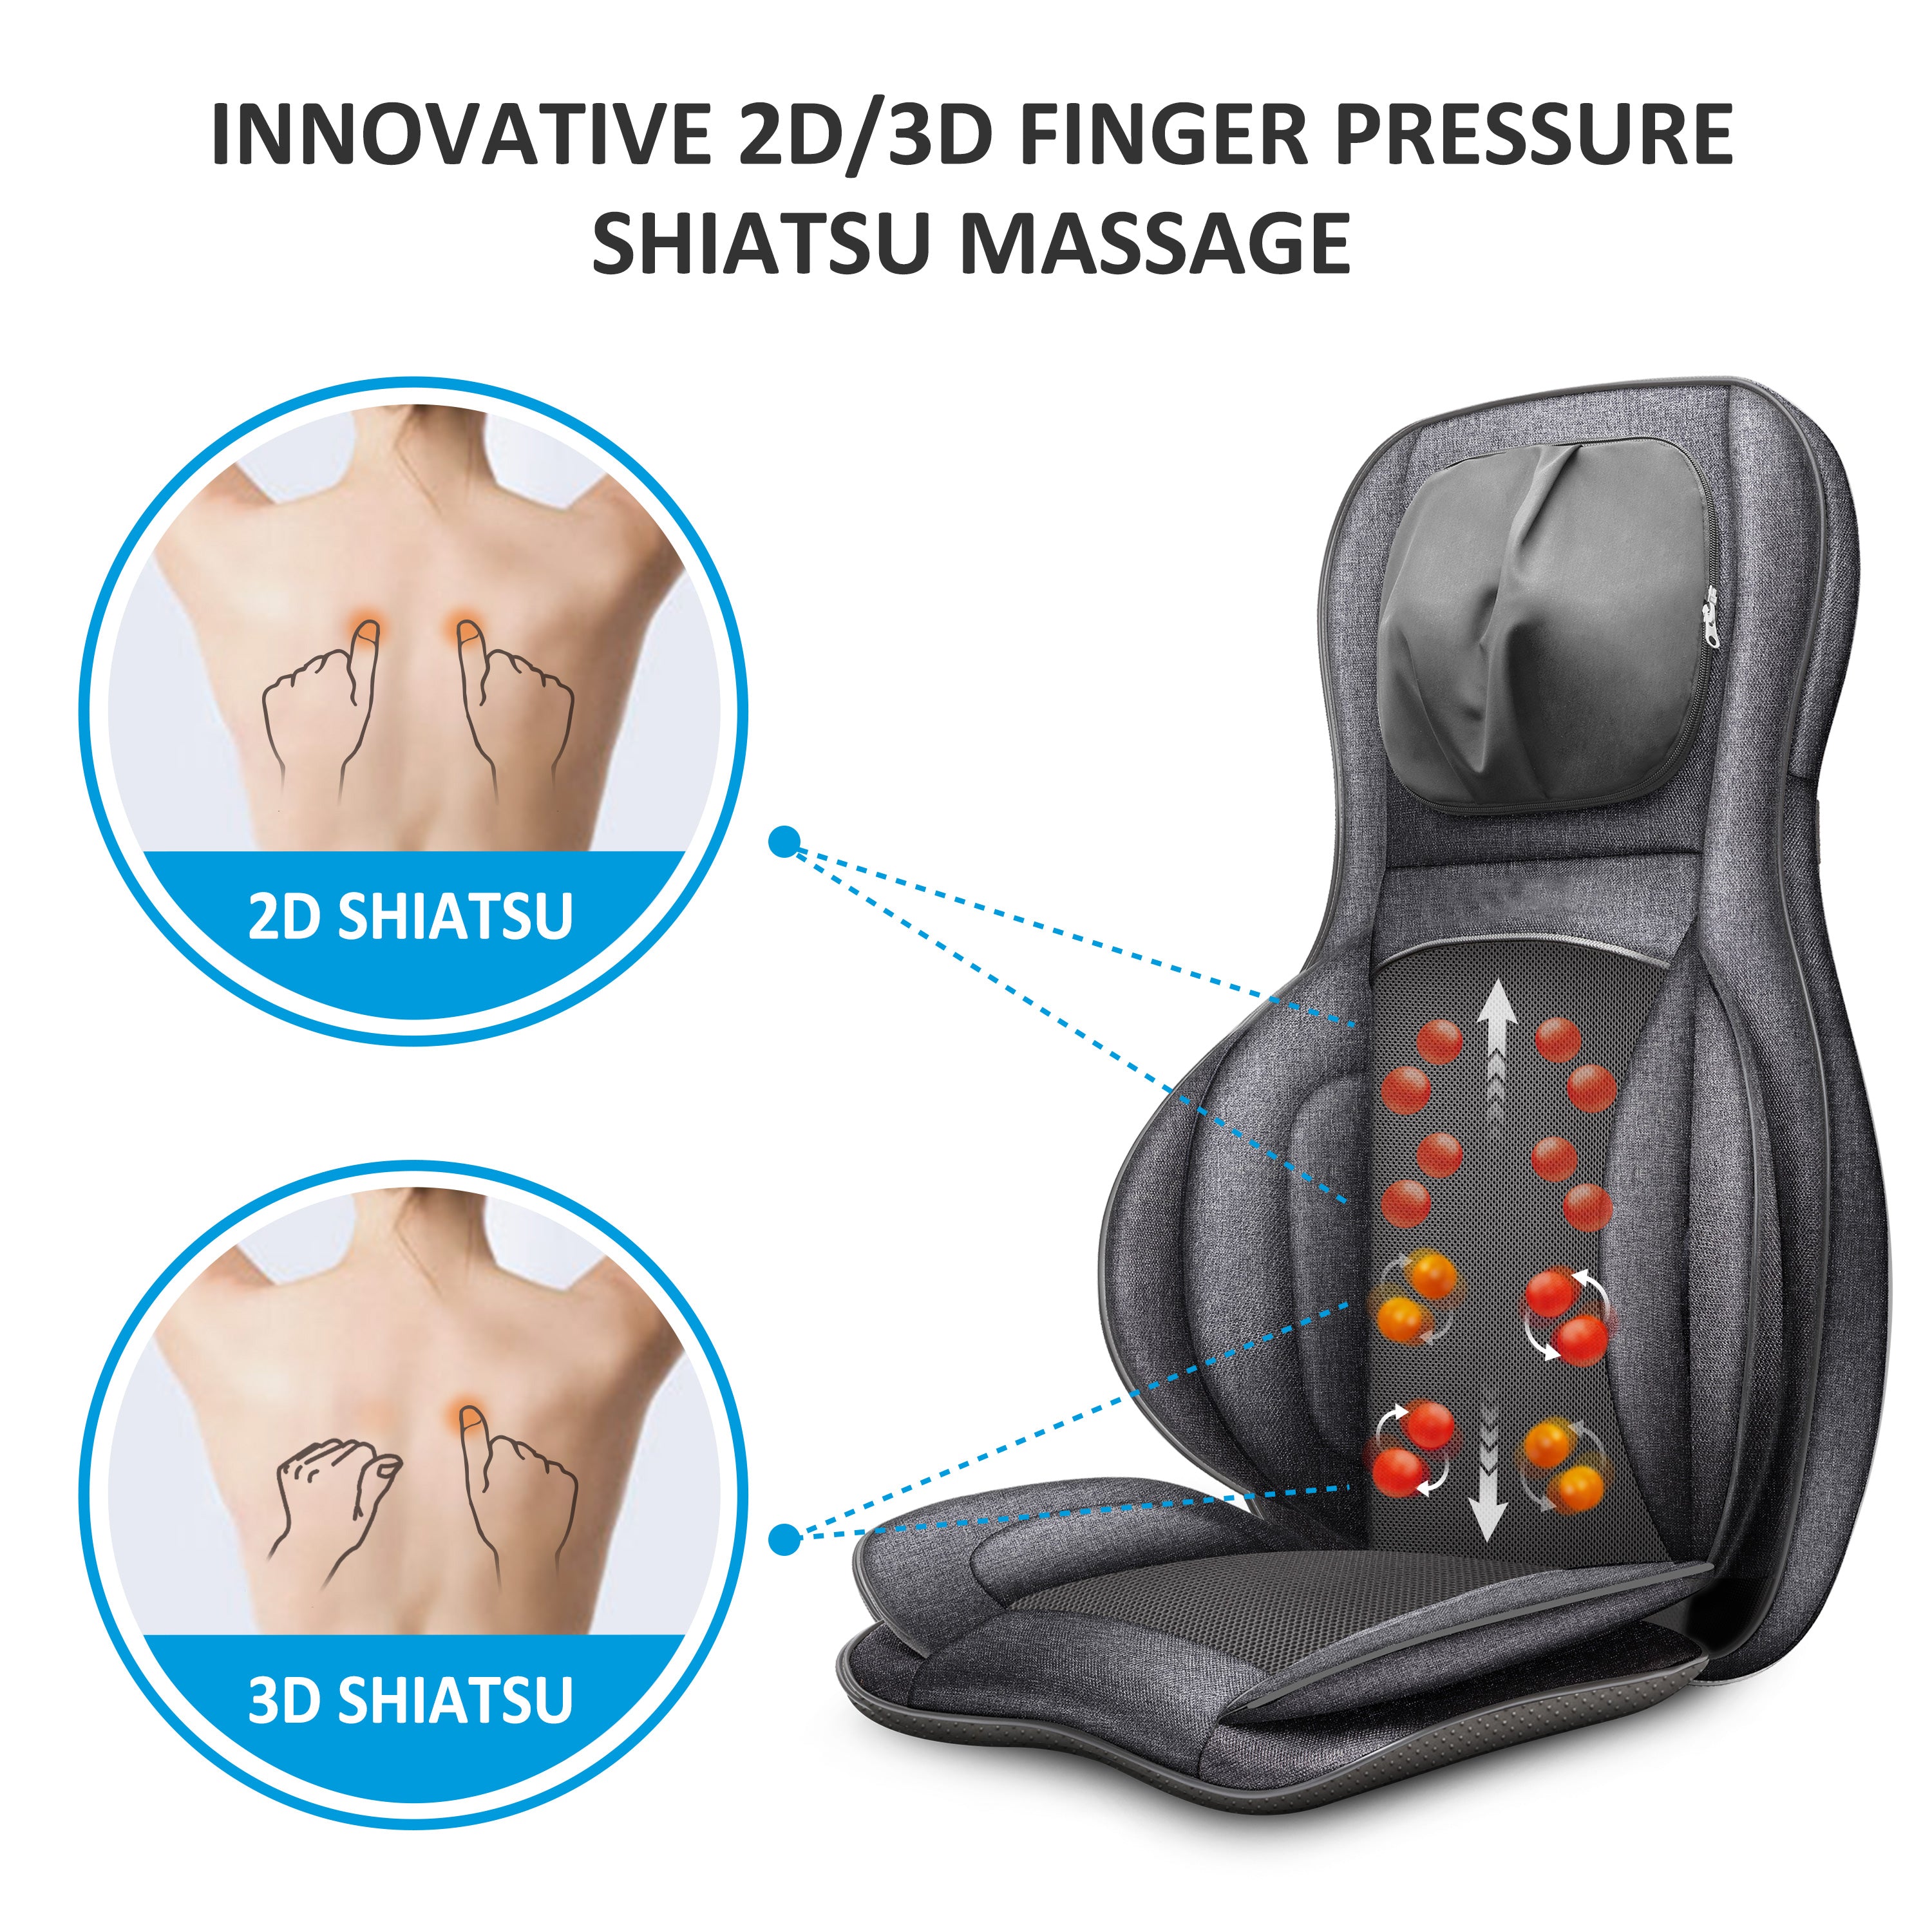 Comfier Shiatsu Neck and Back Massager Review So many functions